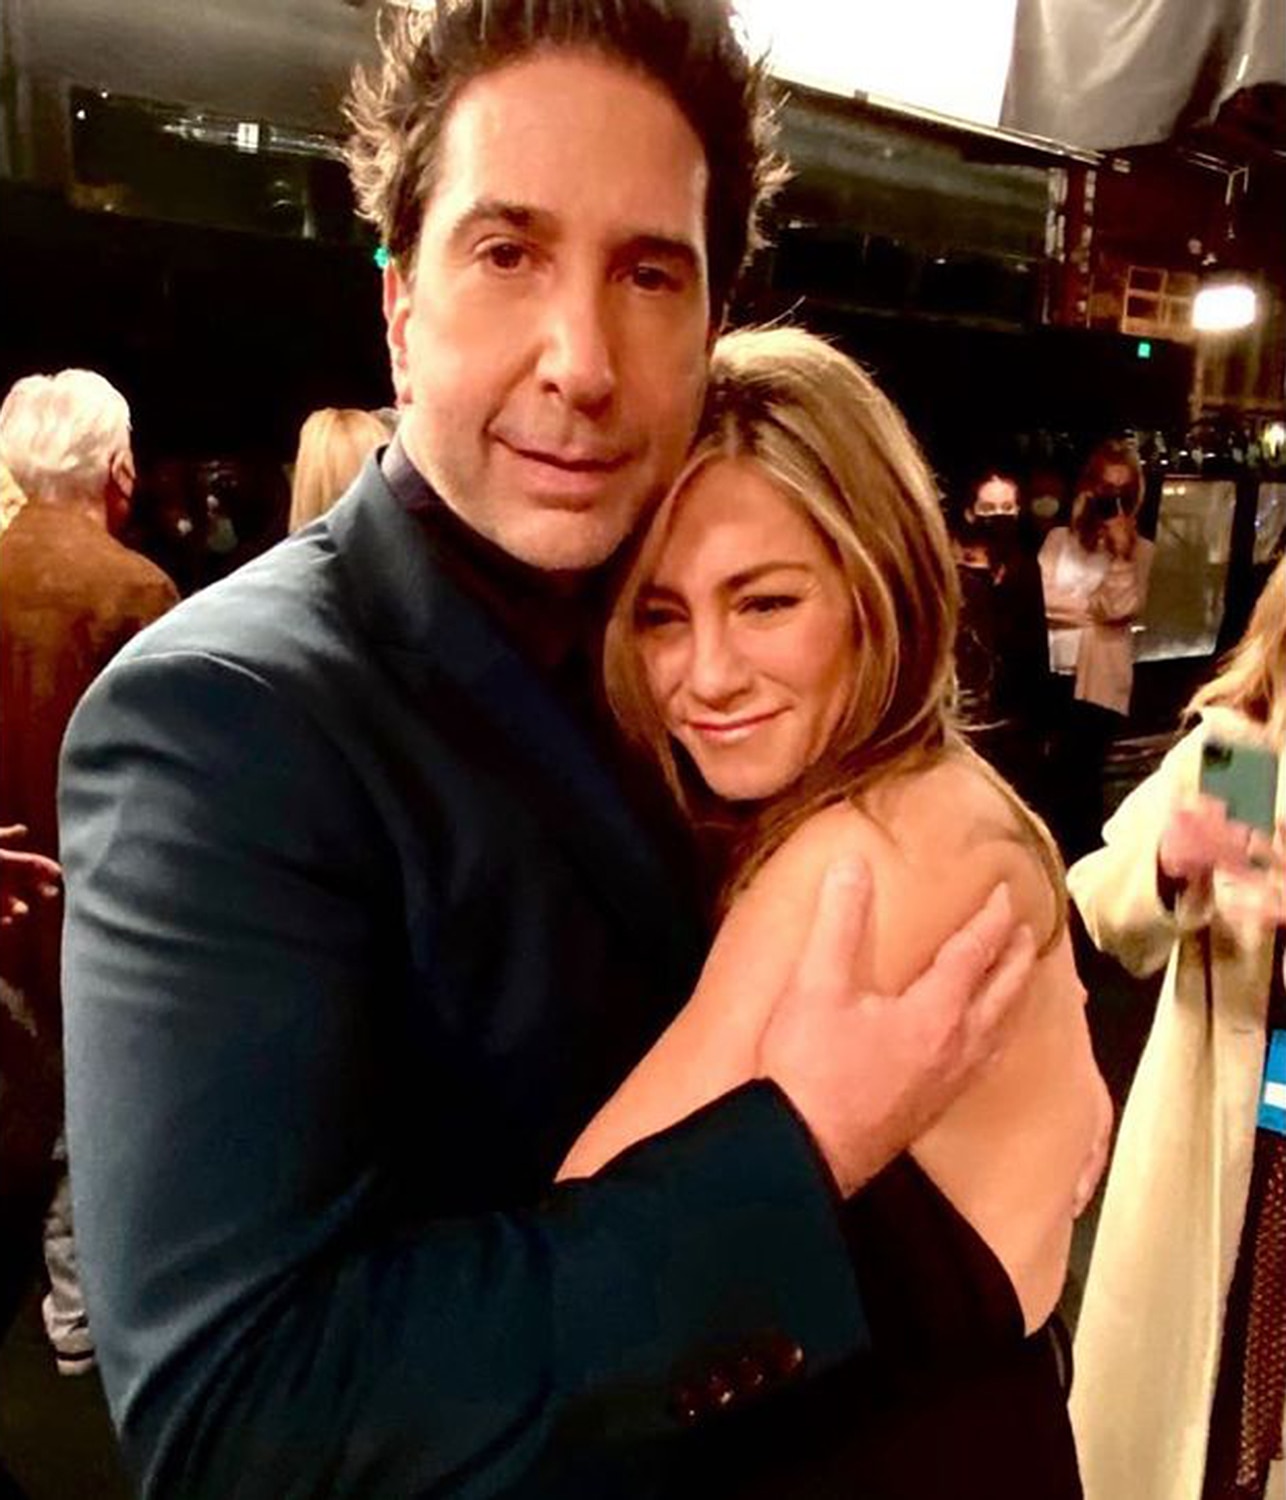 See He's Her Lobster! Ross(David Schwimmer) & Rachel(Jennifer Aniston) Of Friends Are Reportedly Dating, Months After Admitting ‘Crush’ On Each Other